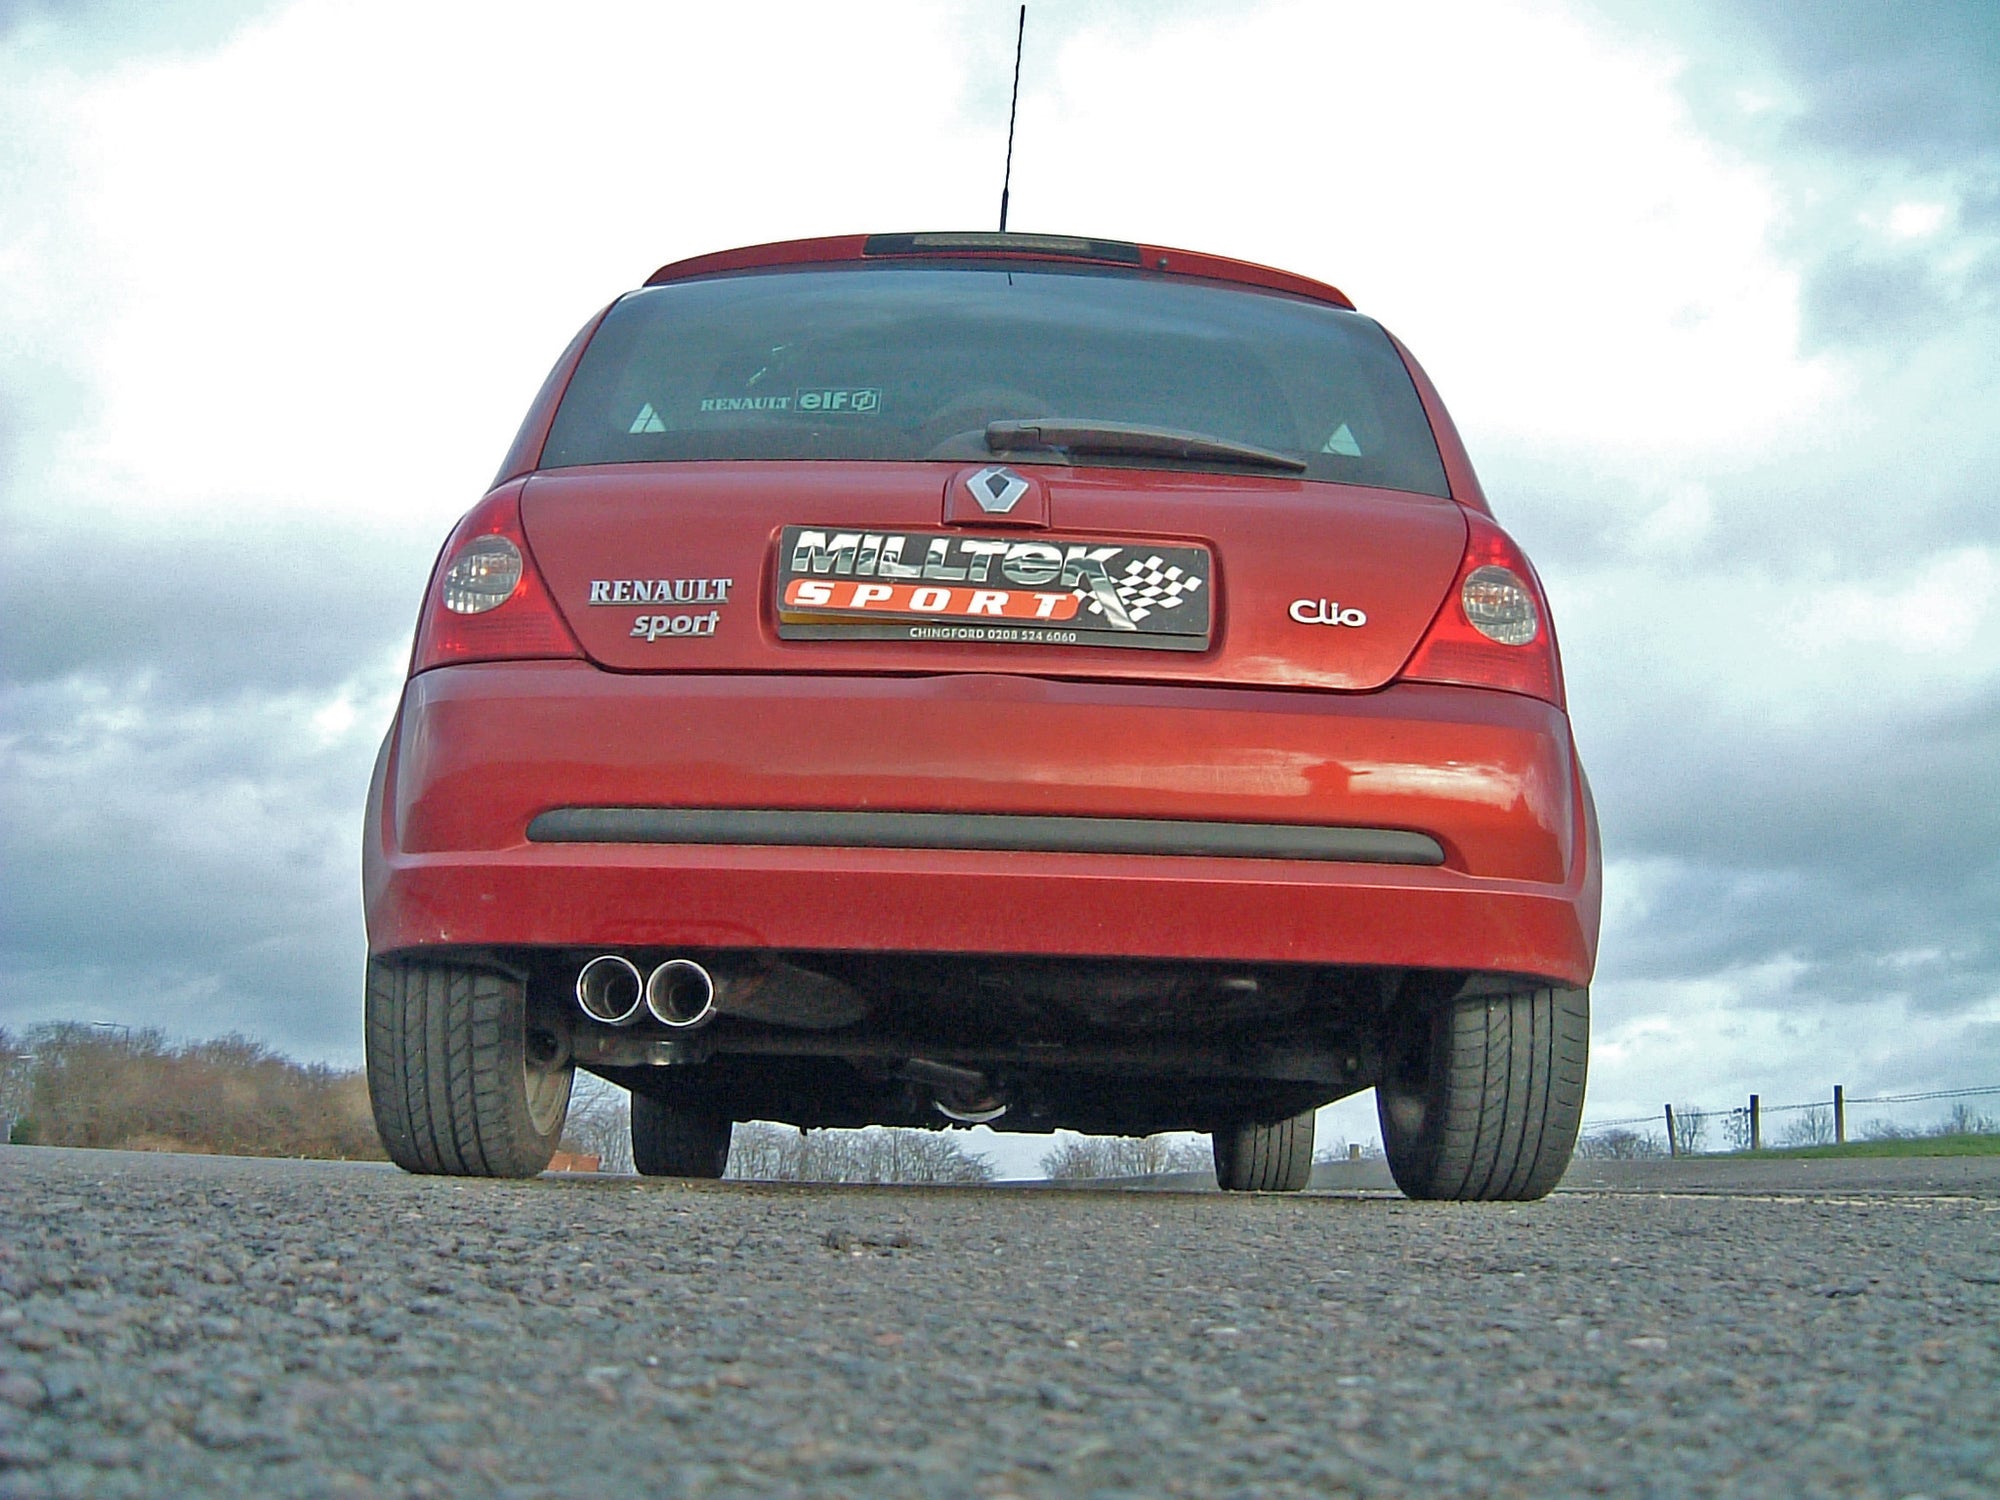 Milltek Exhaust Renault Clio 172 2.0 16v Full System with Twin 76 2mm Special tailpipe (SSXRN102)